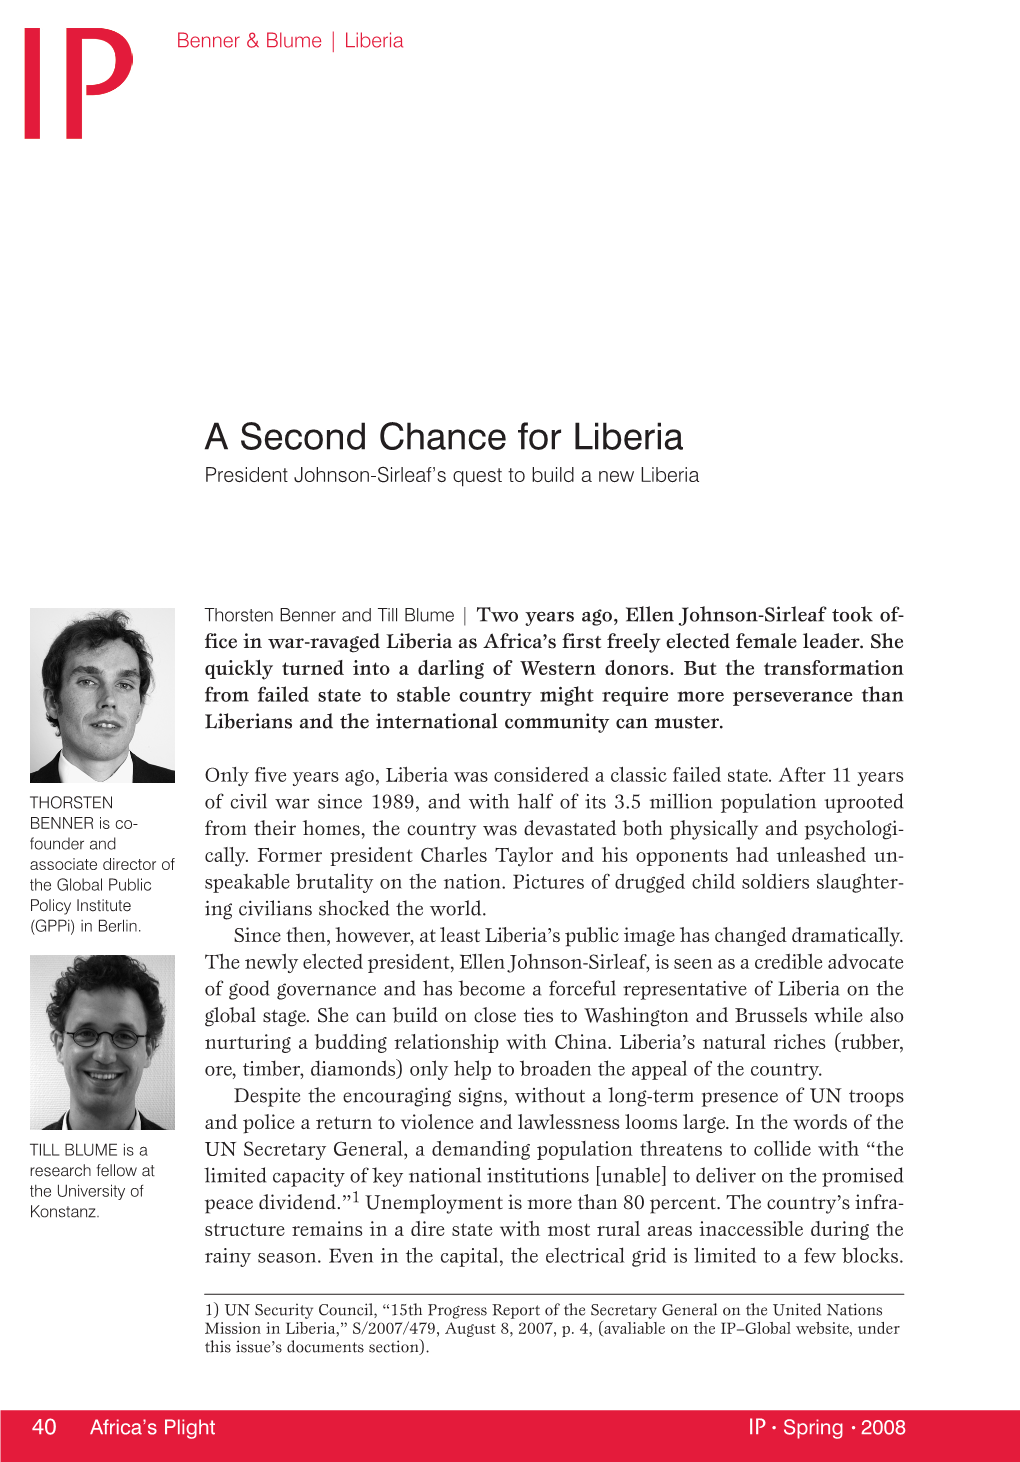 A Second Chance for Liberia President Johnson-Sirleaf’S Quest to Build a New Liberia